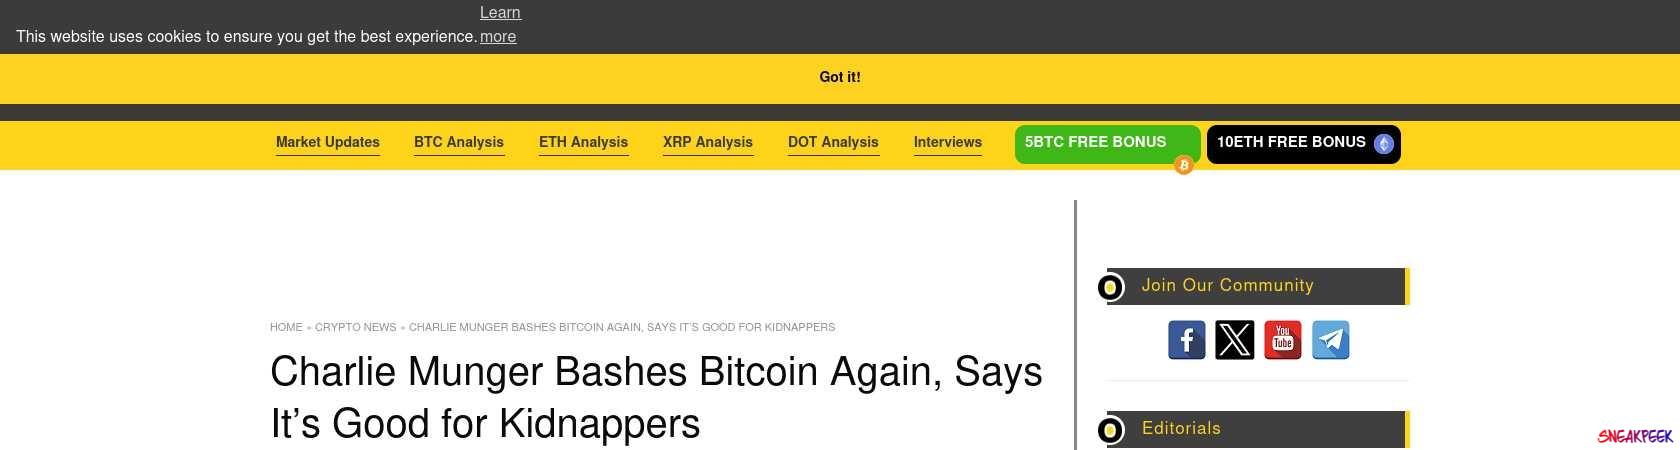 Read the full Article:  ⭲ Charlie Munger Bashes Bitcoin Again, Says It’s Good for Kidnappers